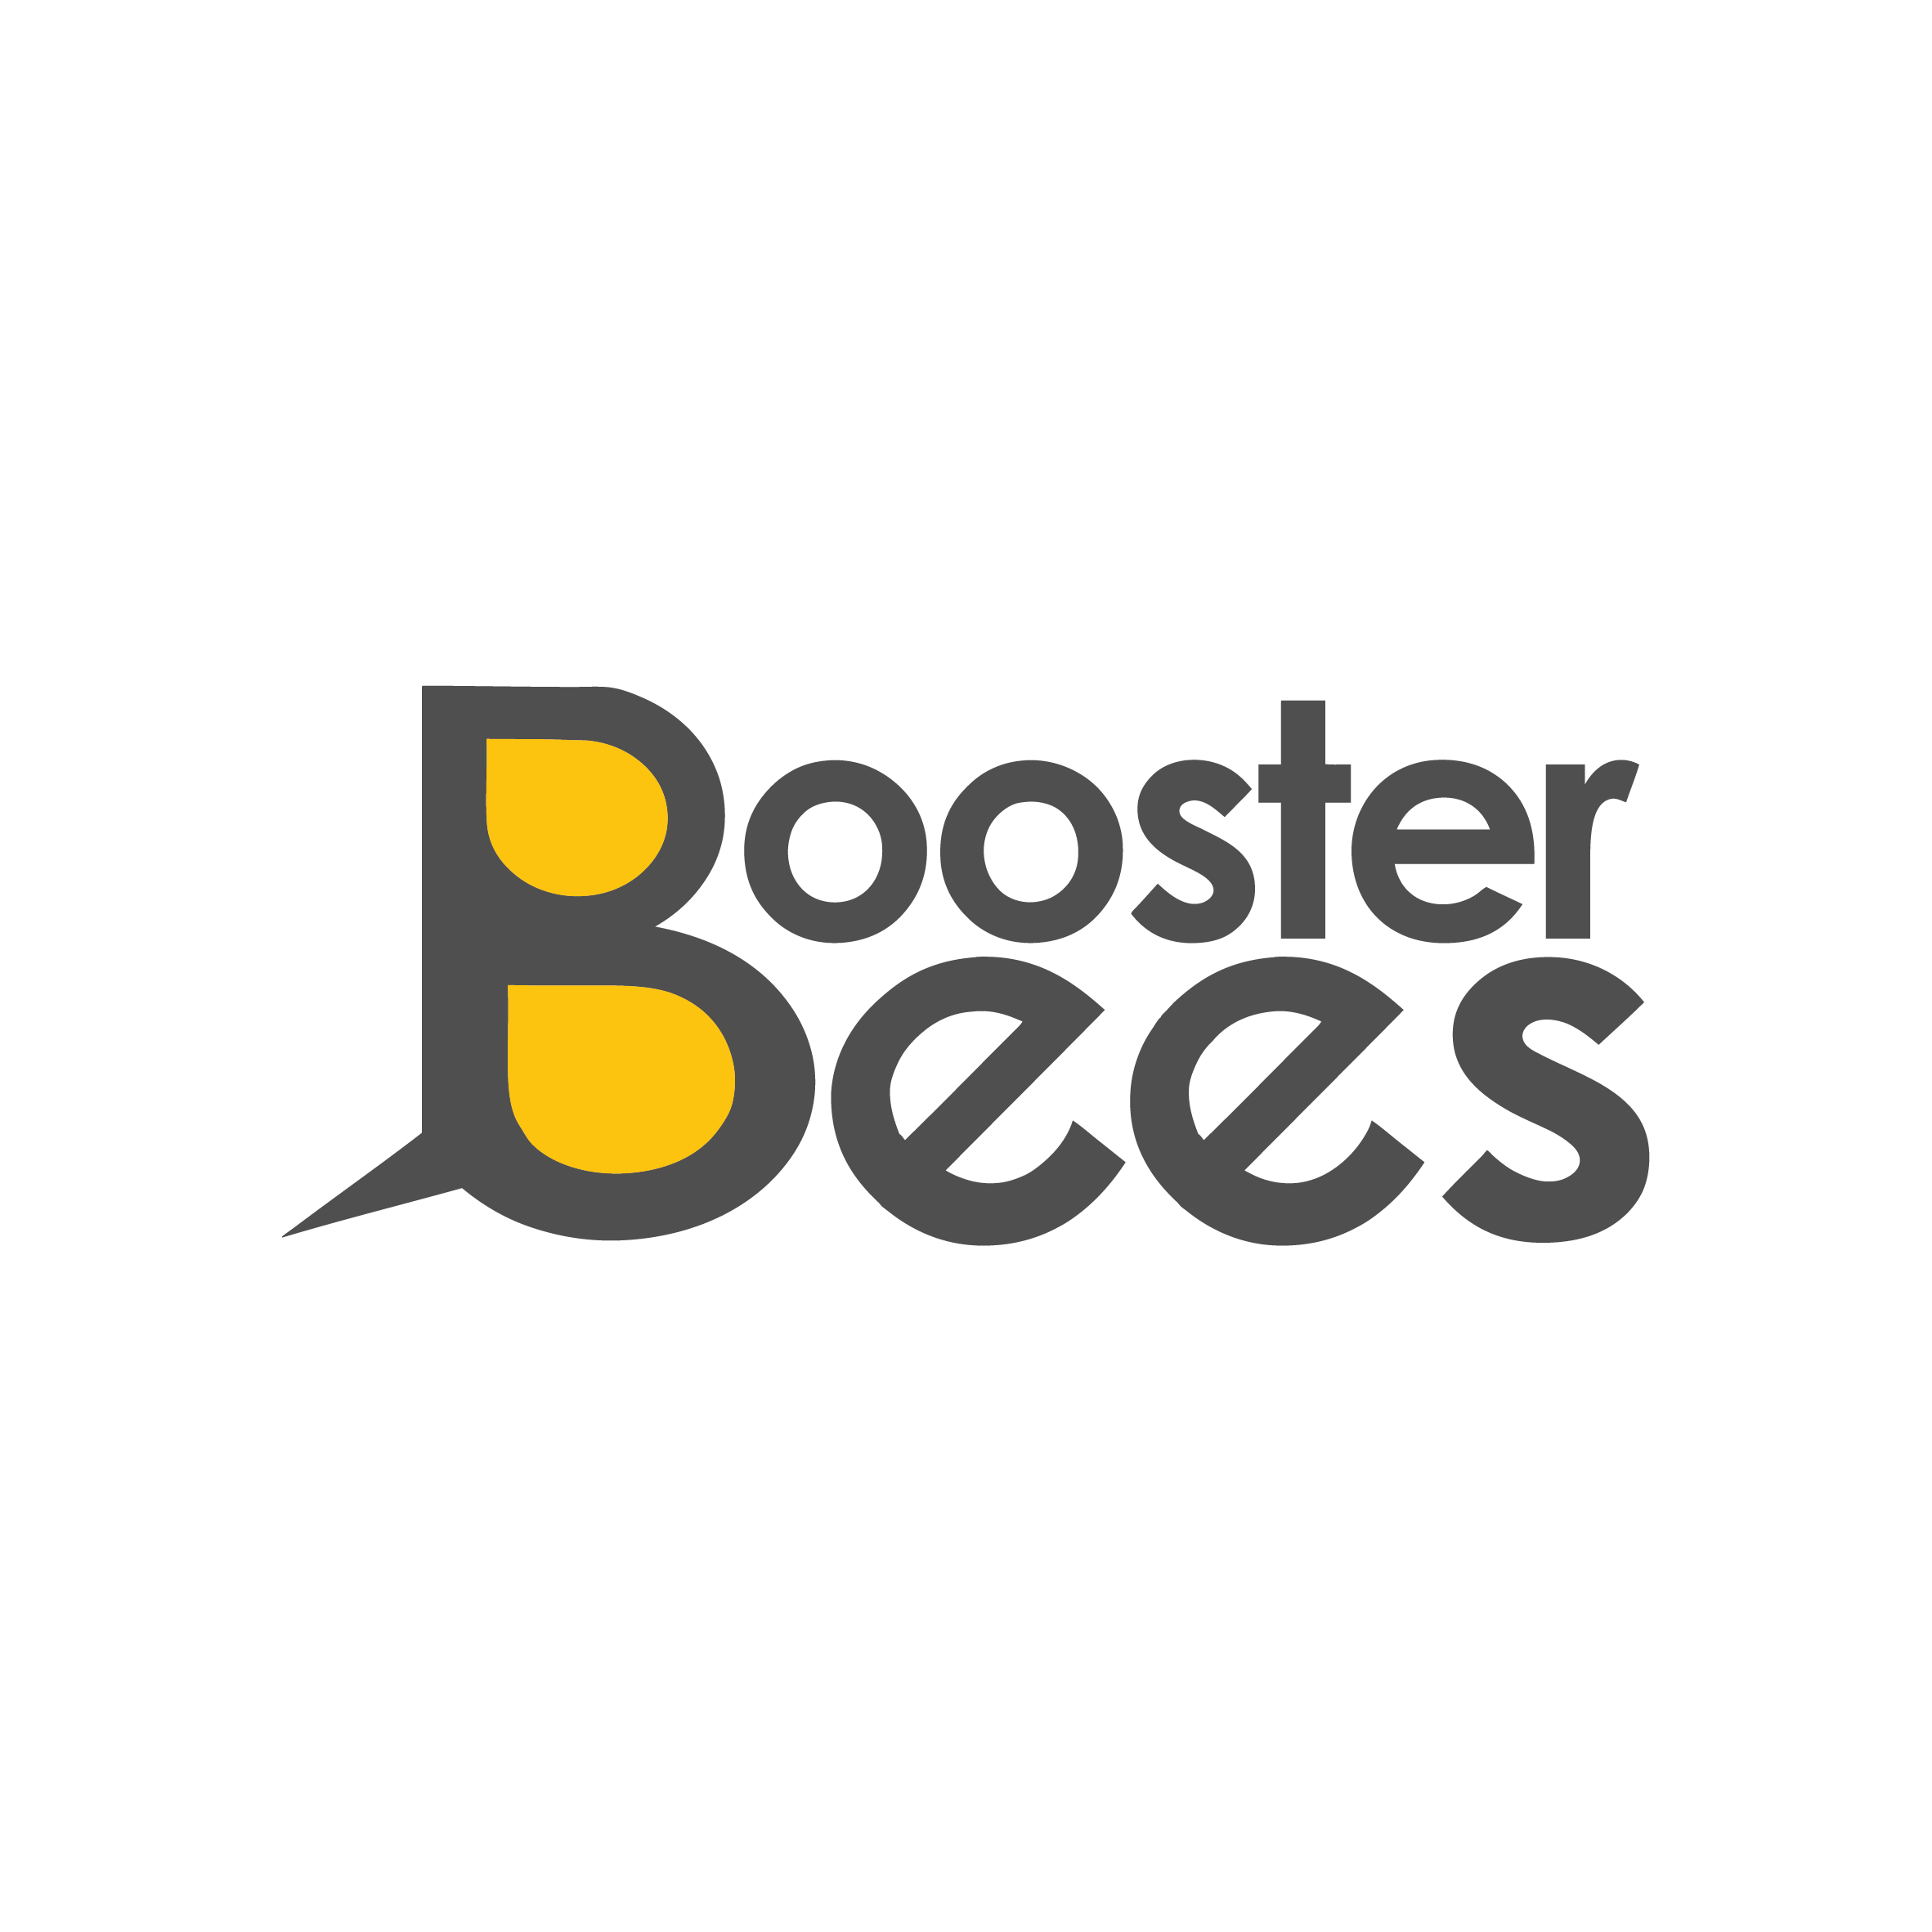 Boosterbees